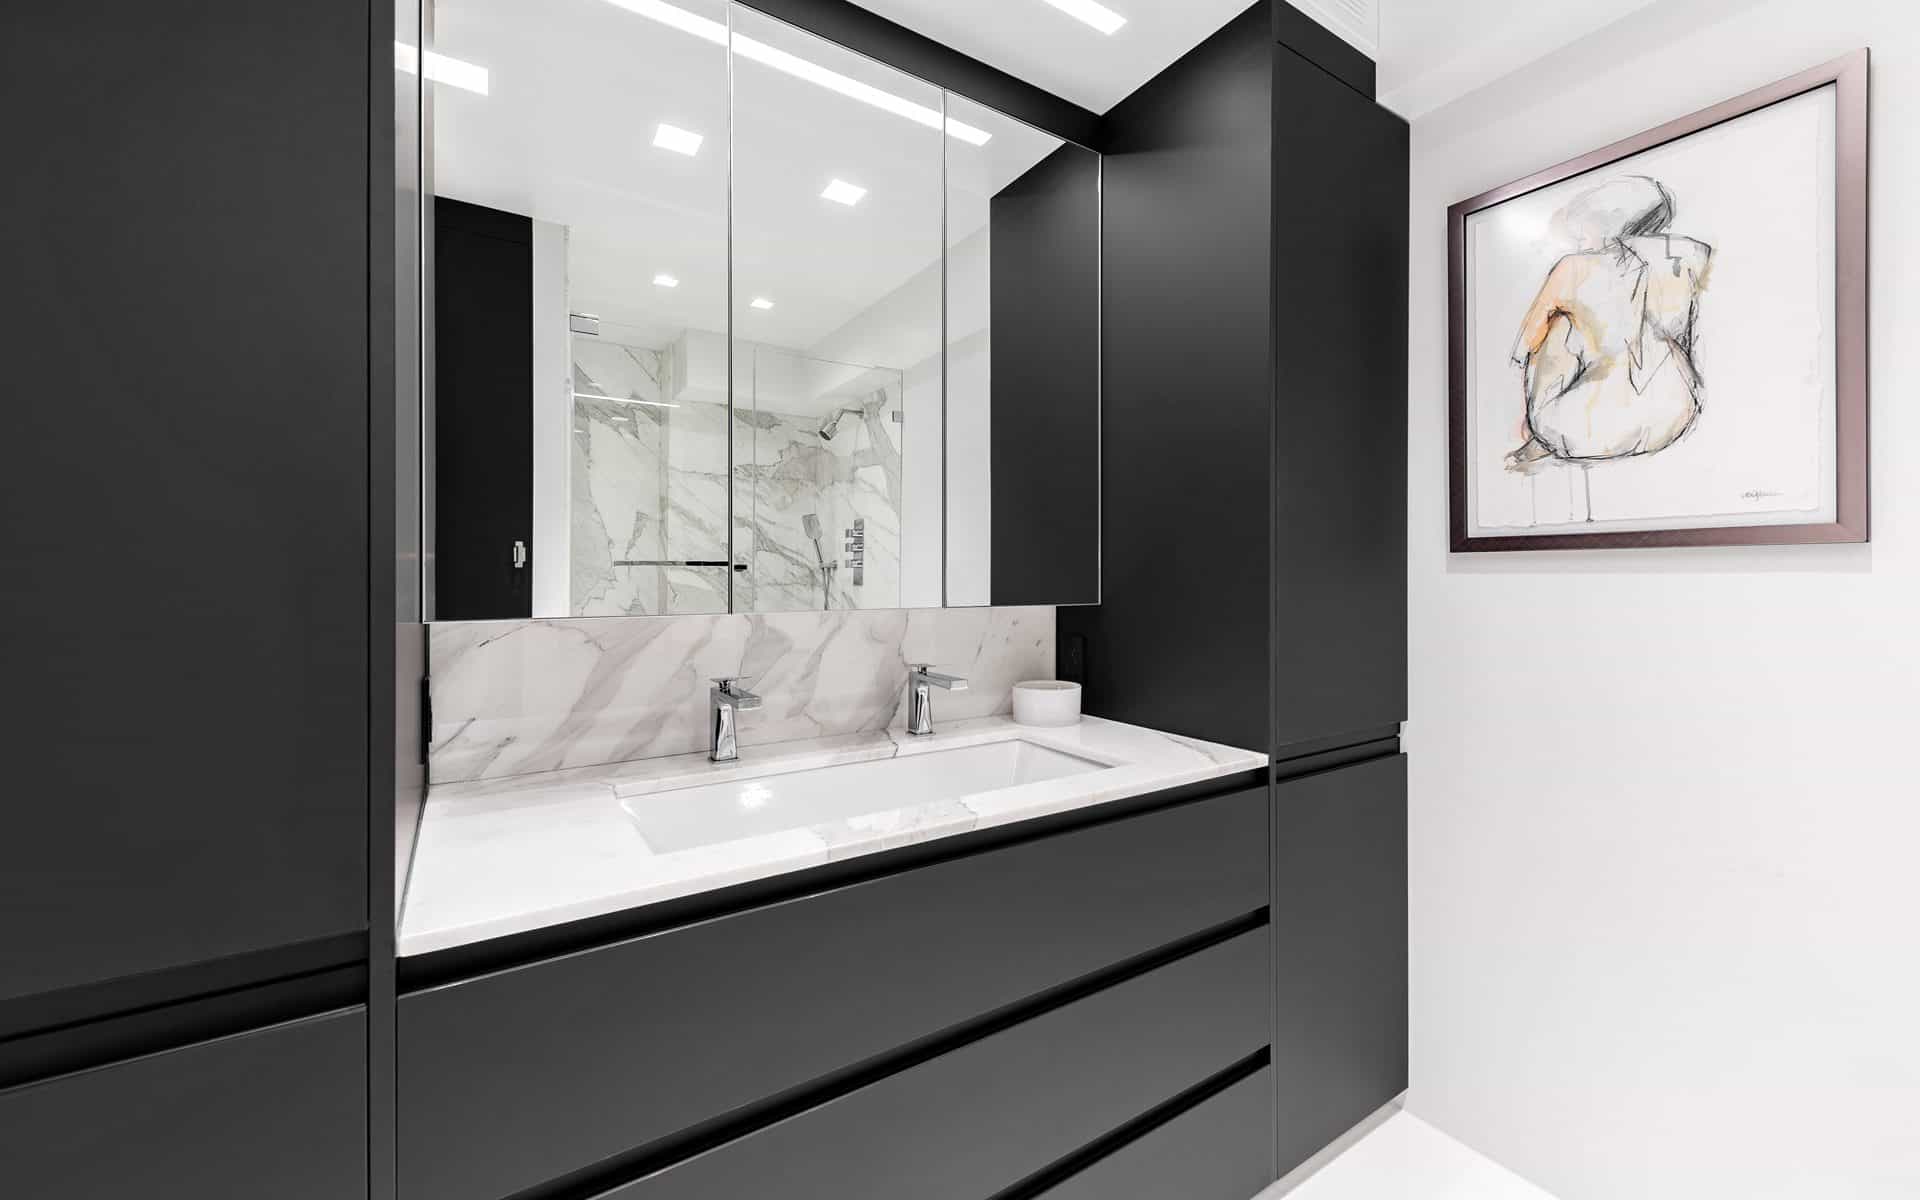 Modern custom bathroom features black Bilotta cabinetry with no handles, mirrored backdrop and modern accents.